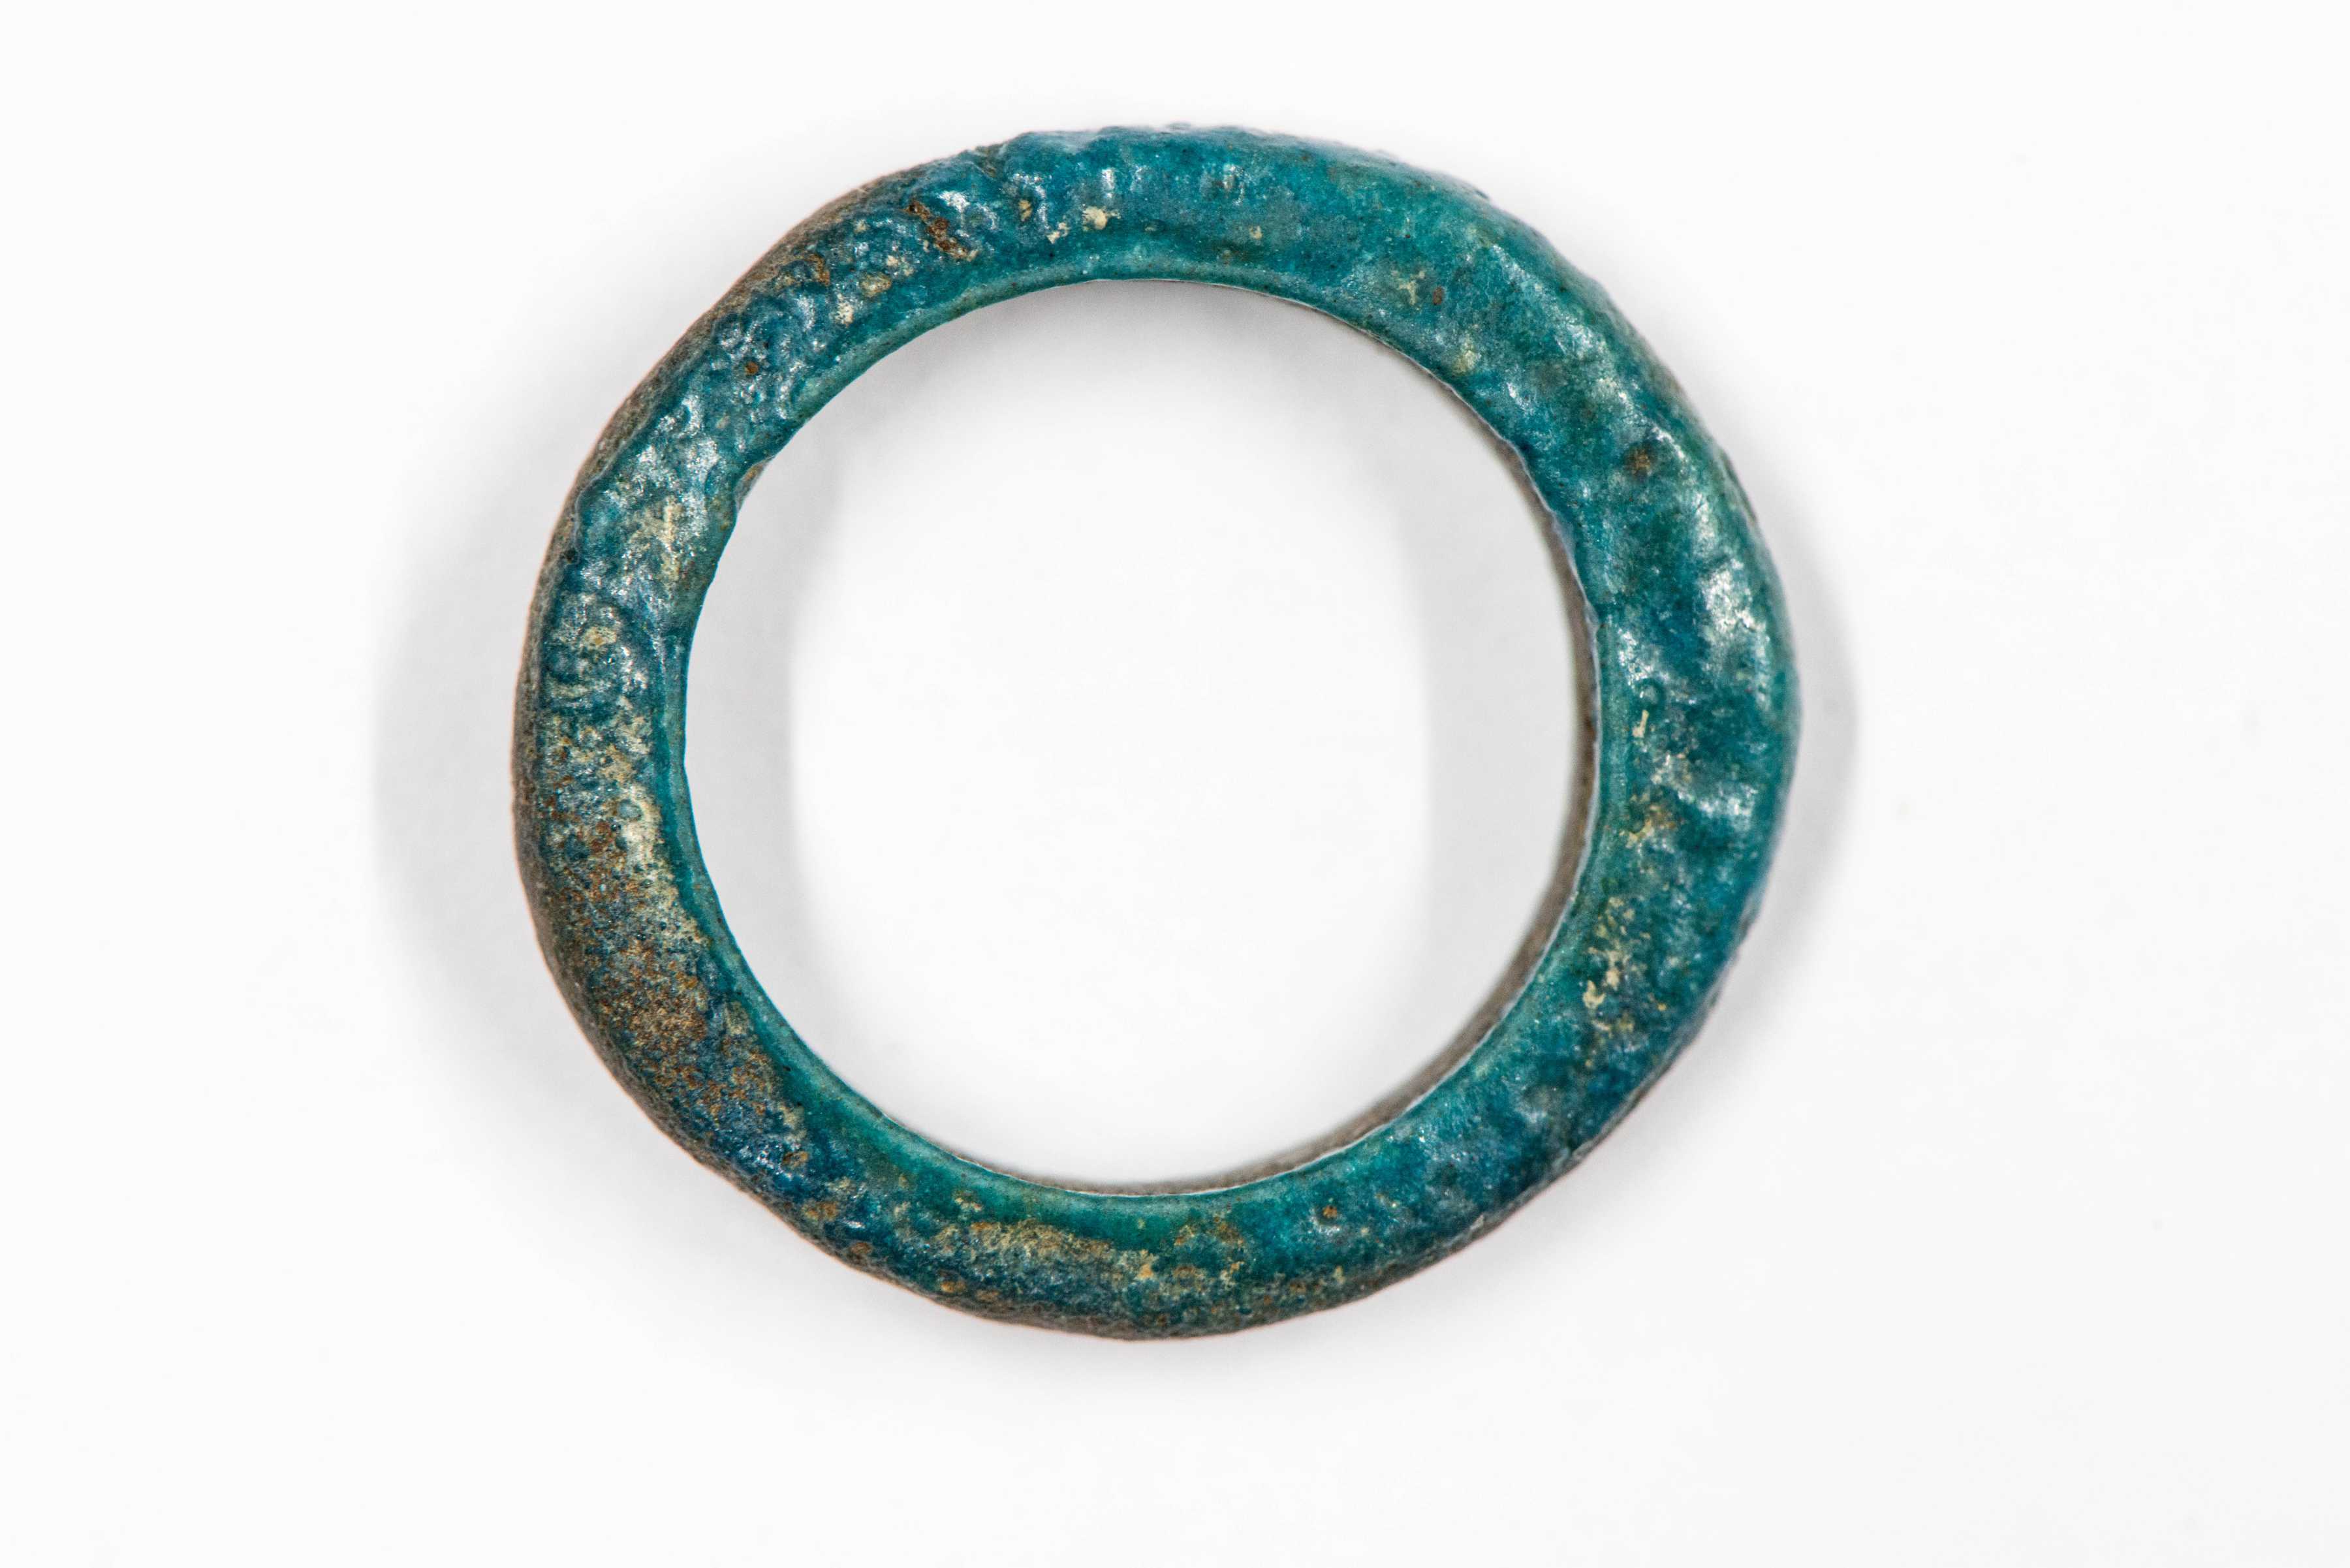 Image for: Faience ring